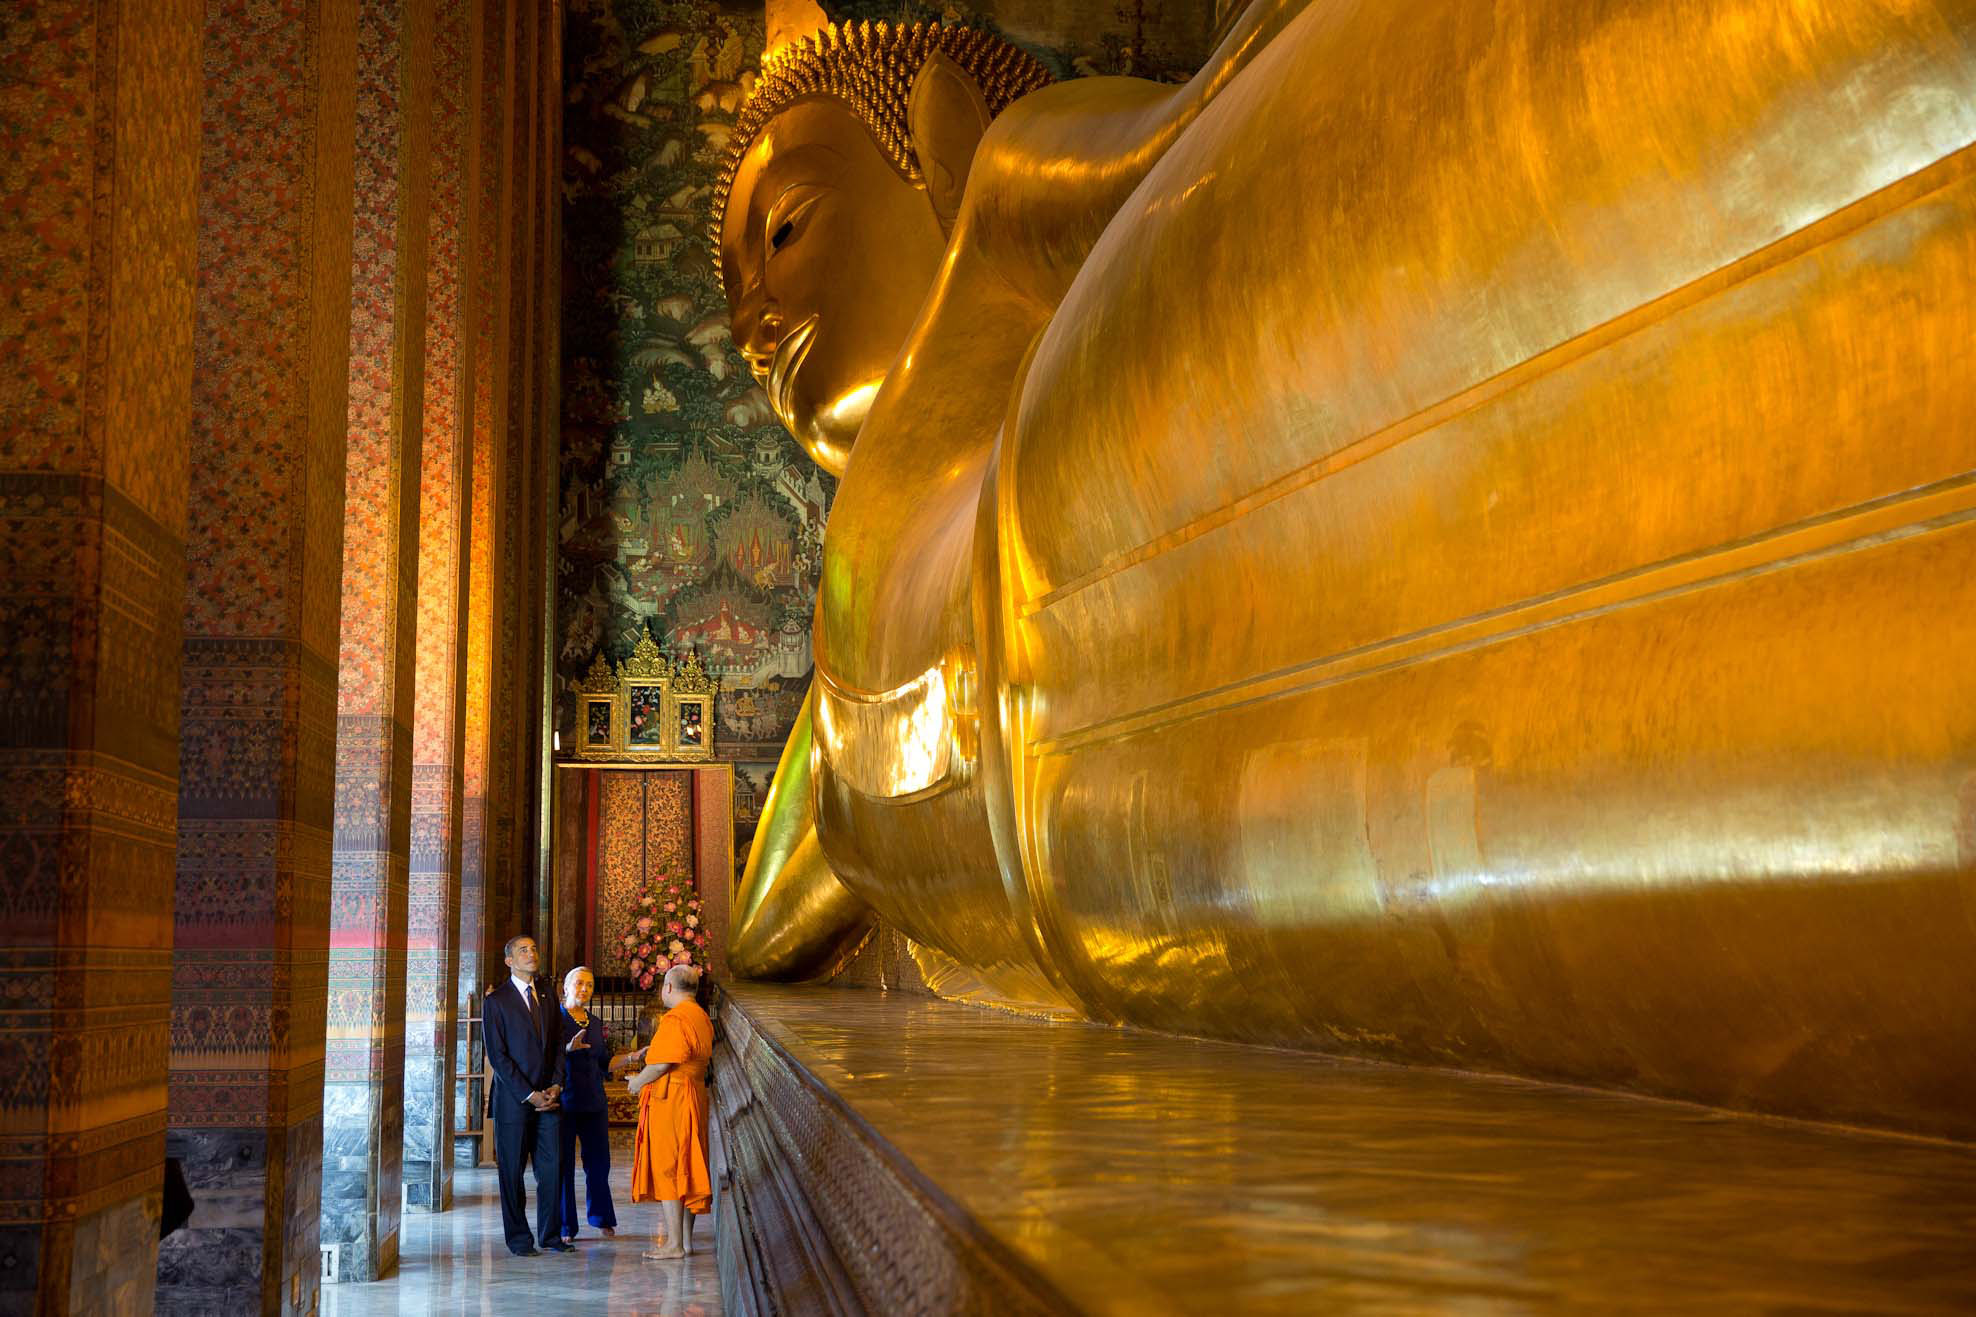 President Obama and Secretary of State Clinton tour the Wat Pho Royal Monastery